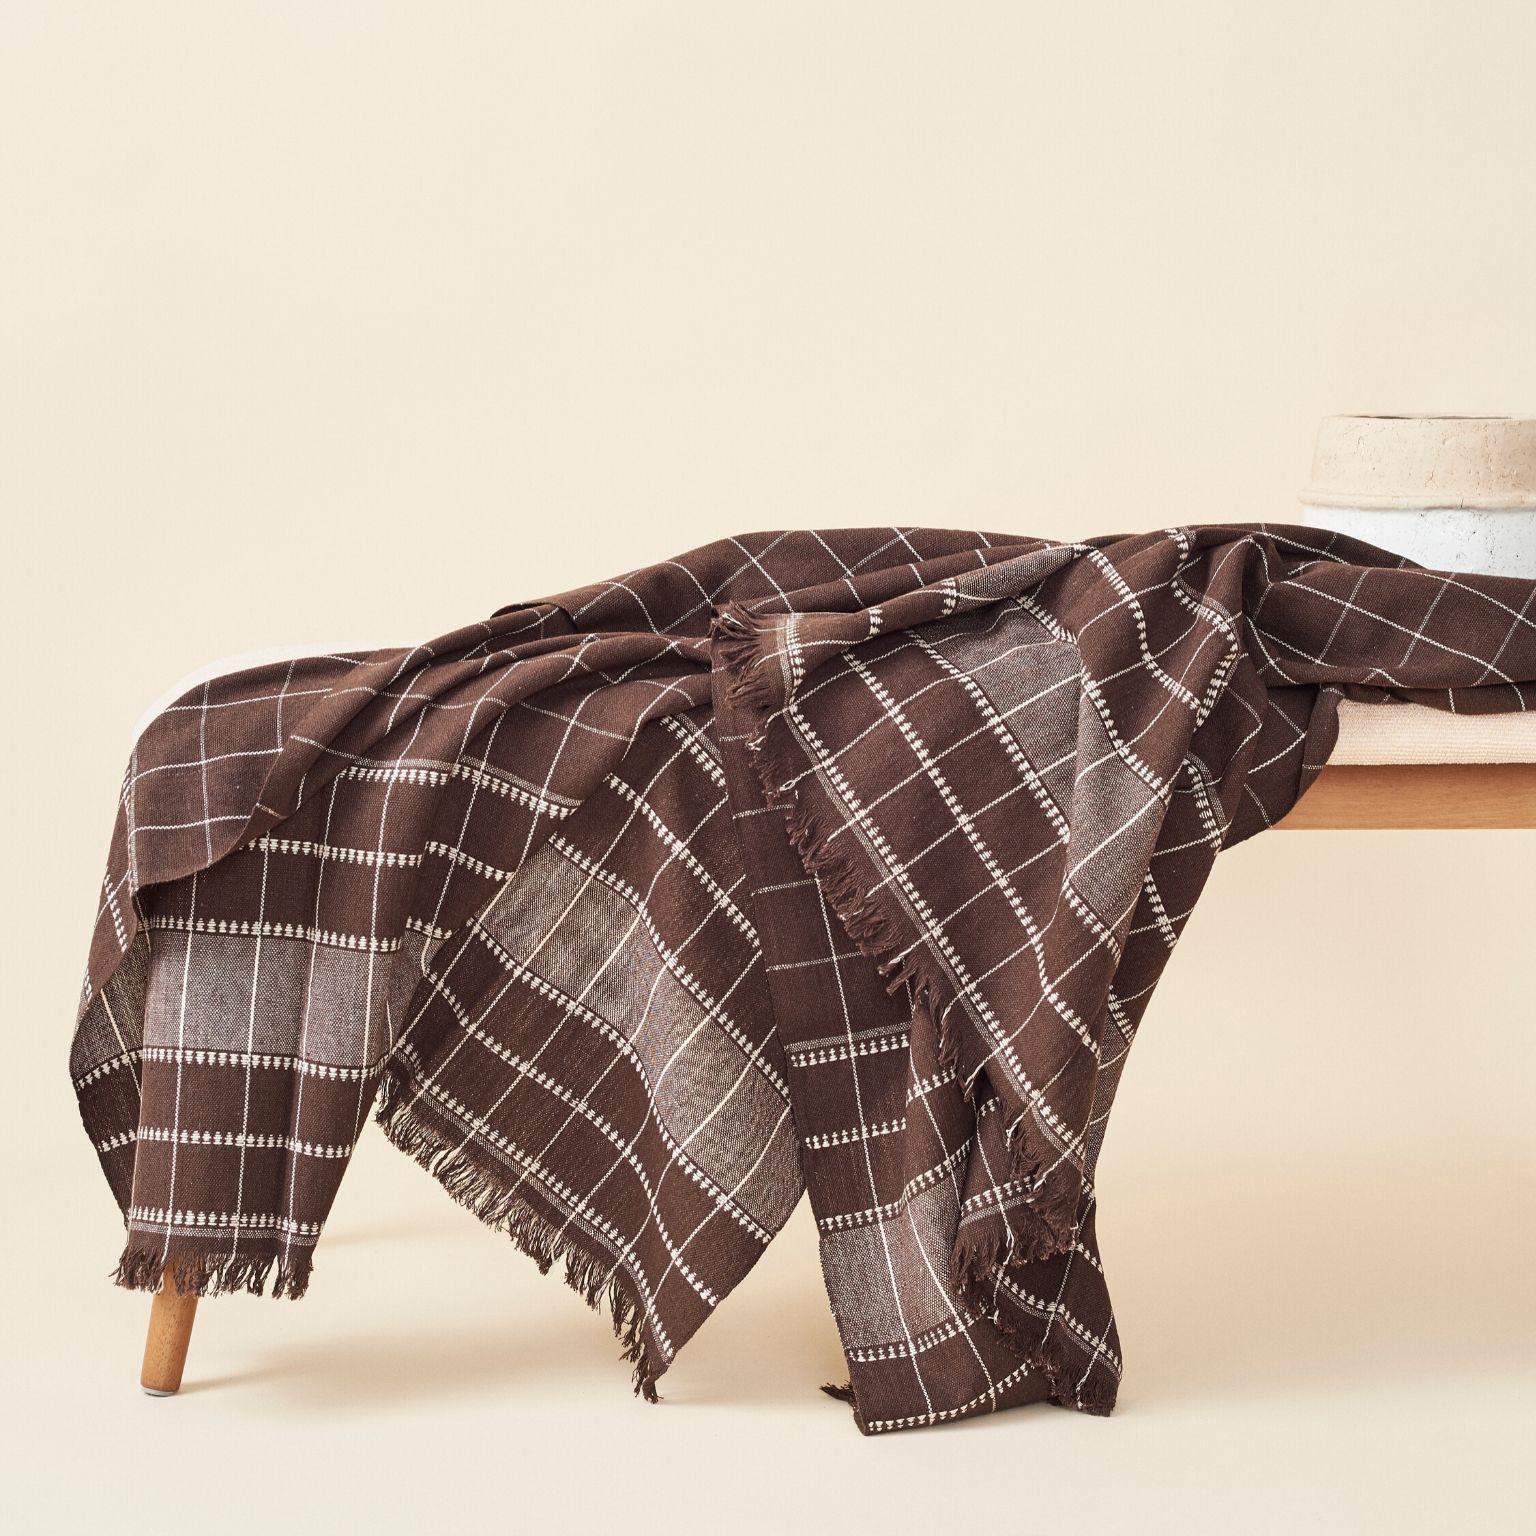 Nepalese Treacle Brown Handloom Throw / Blanket In Organic Cotton In Checks Pattern For Sale